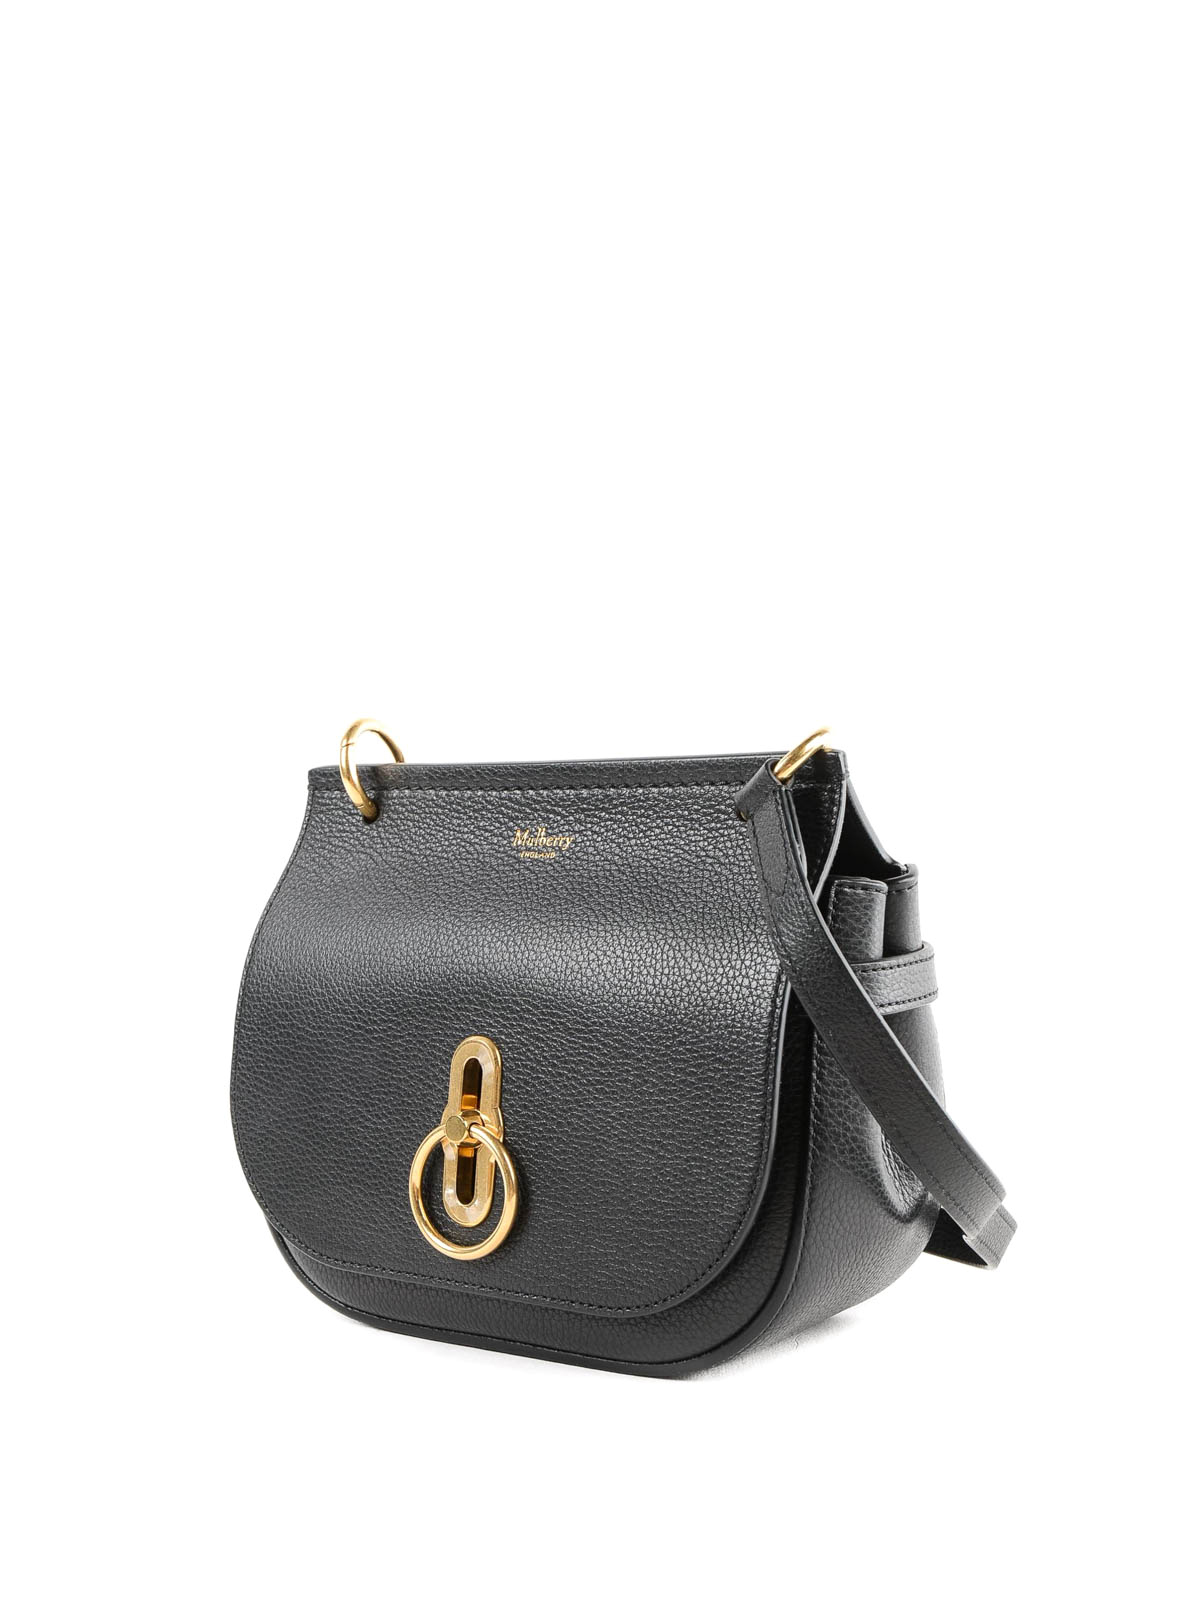 Mulberry - Black and gold grainy leather crossbody bag - cross body ...